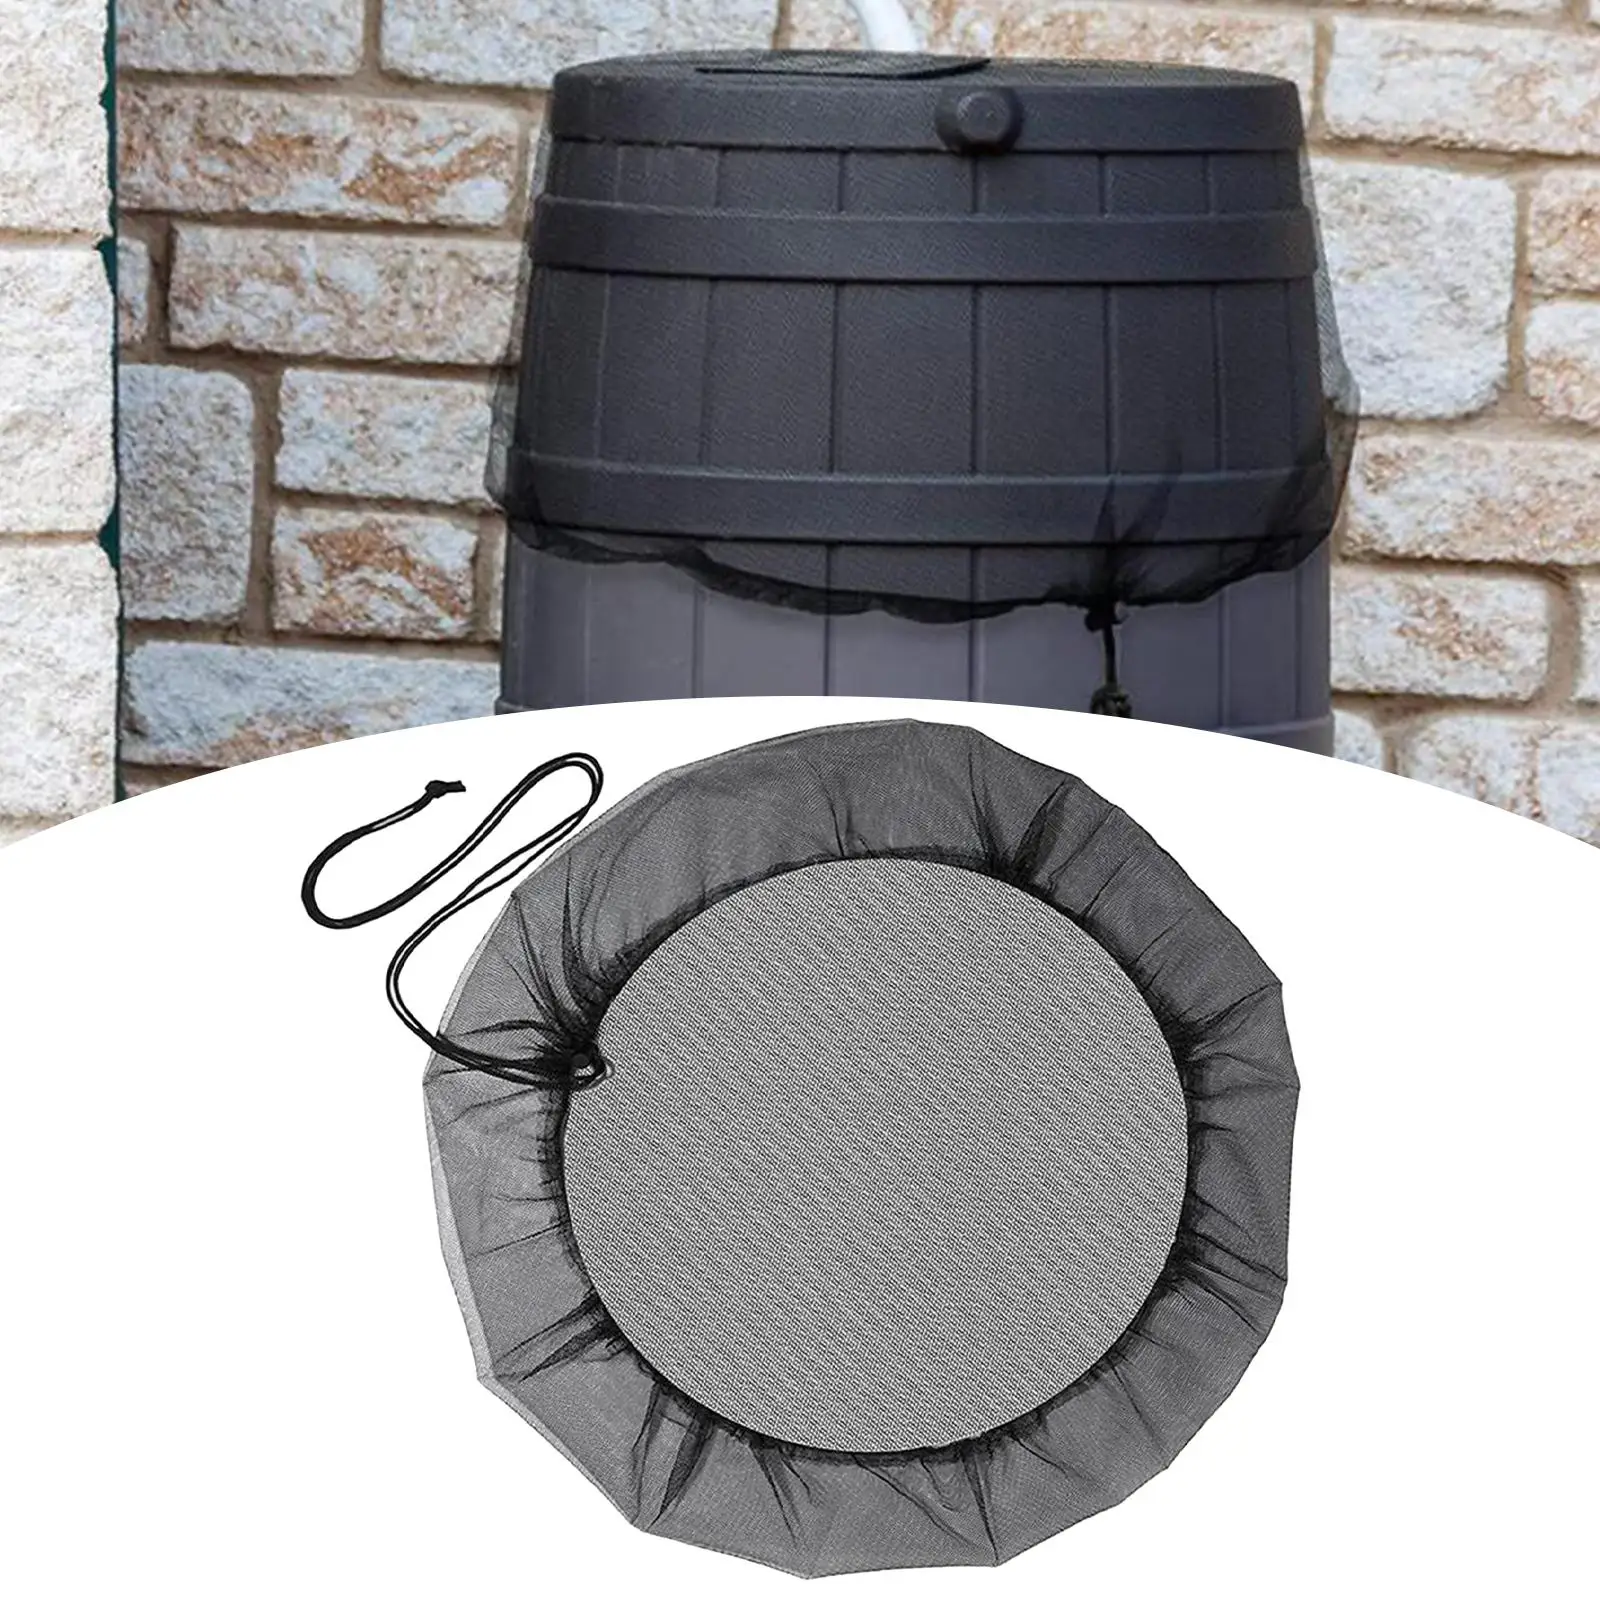 Mesh Cover Netting for Barrel Accessories with Drawstring